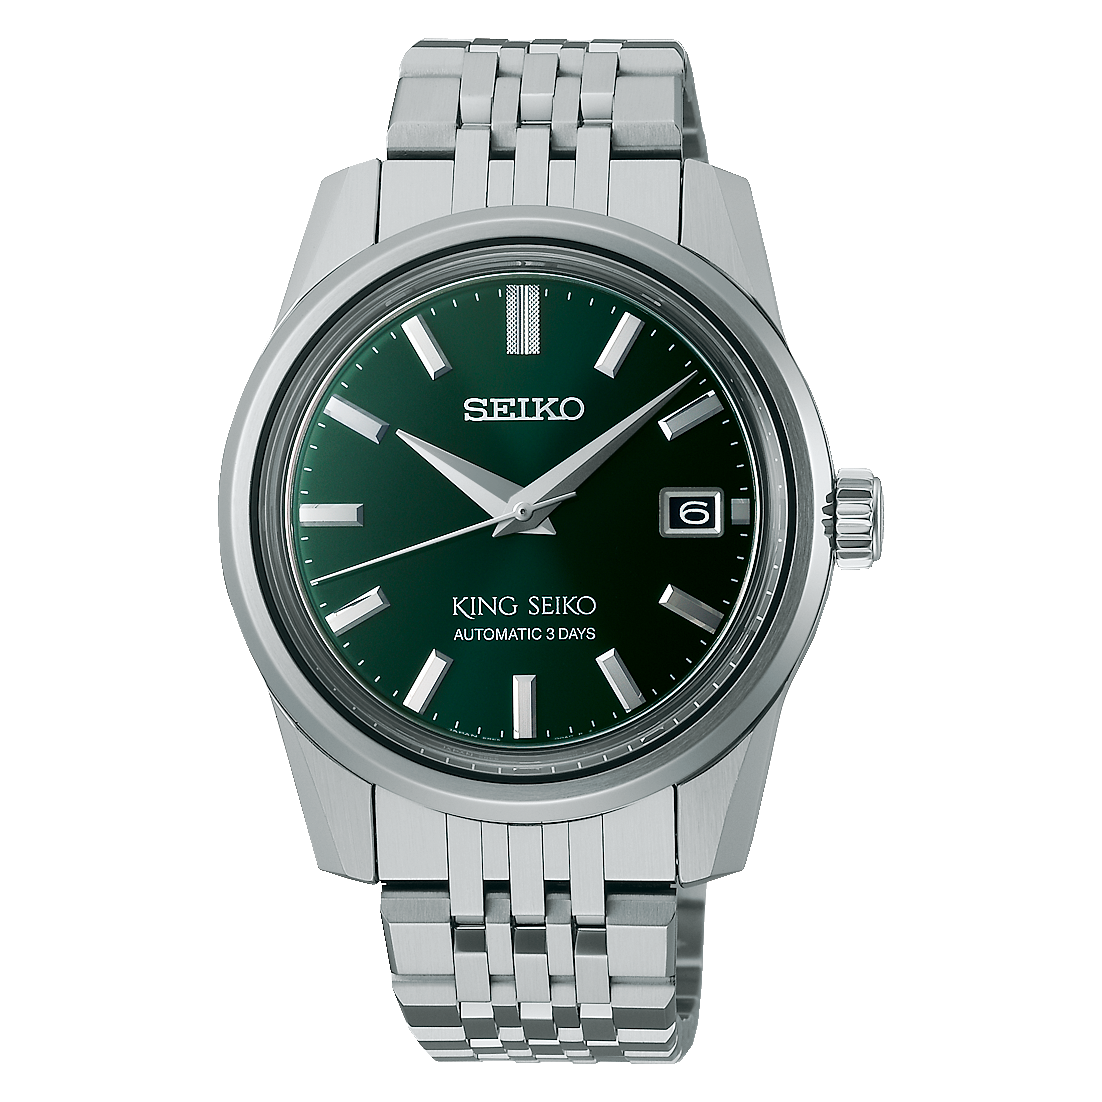 King Seiko 'Jade' KSK | Seiko Boutique | The Official UK Online Store